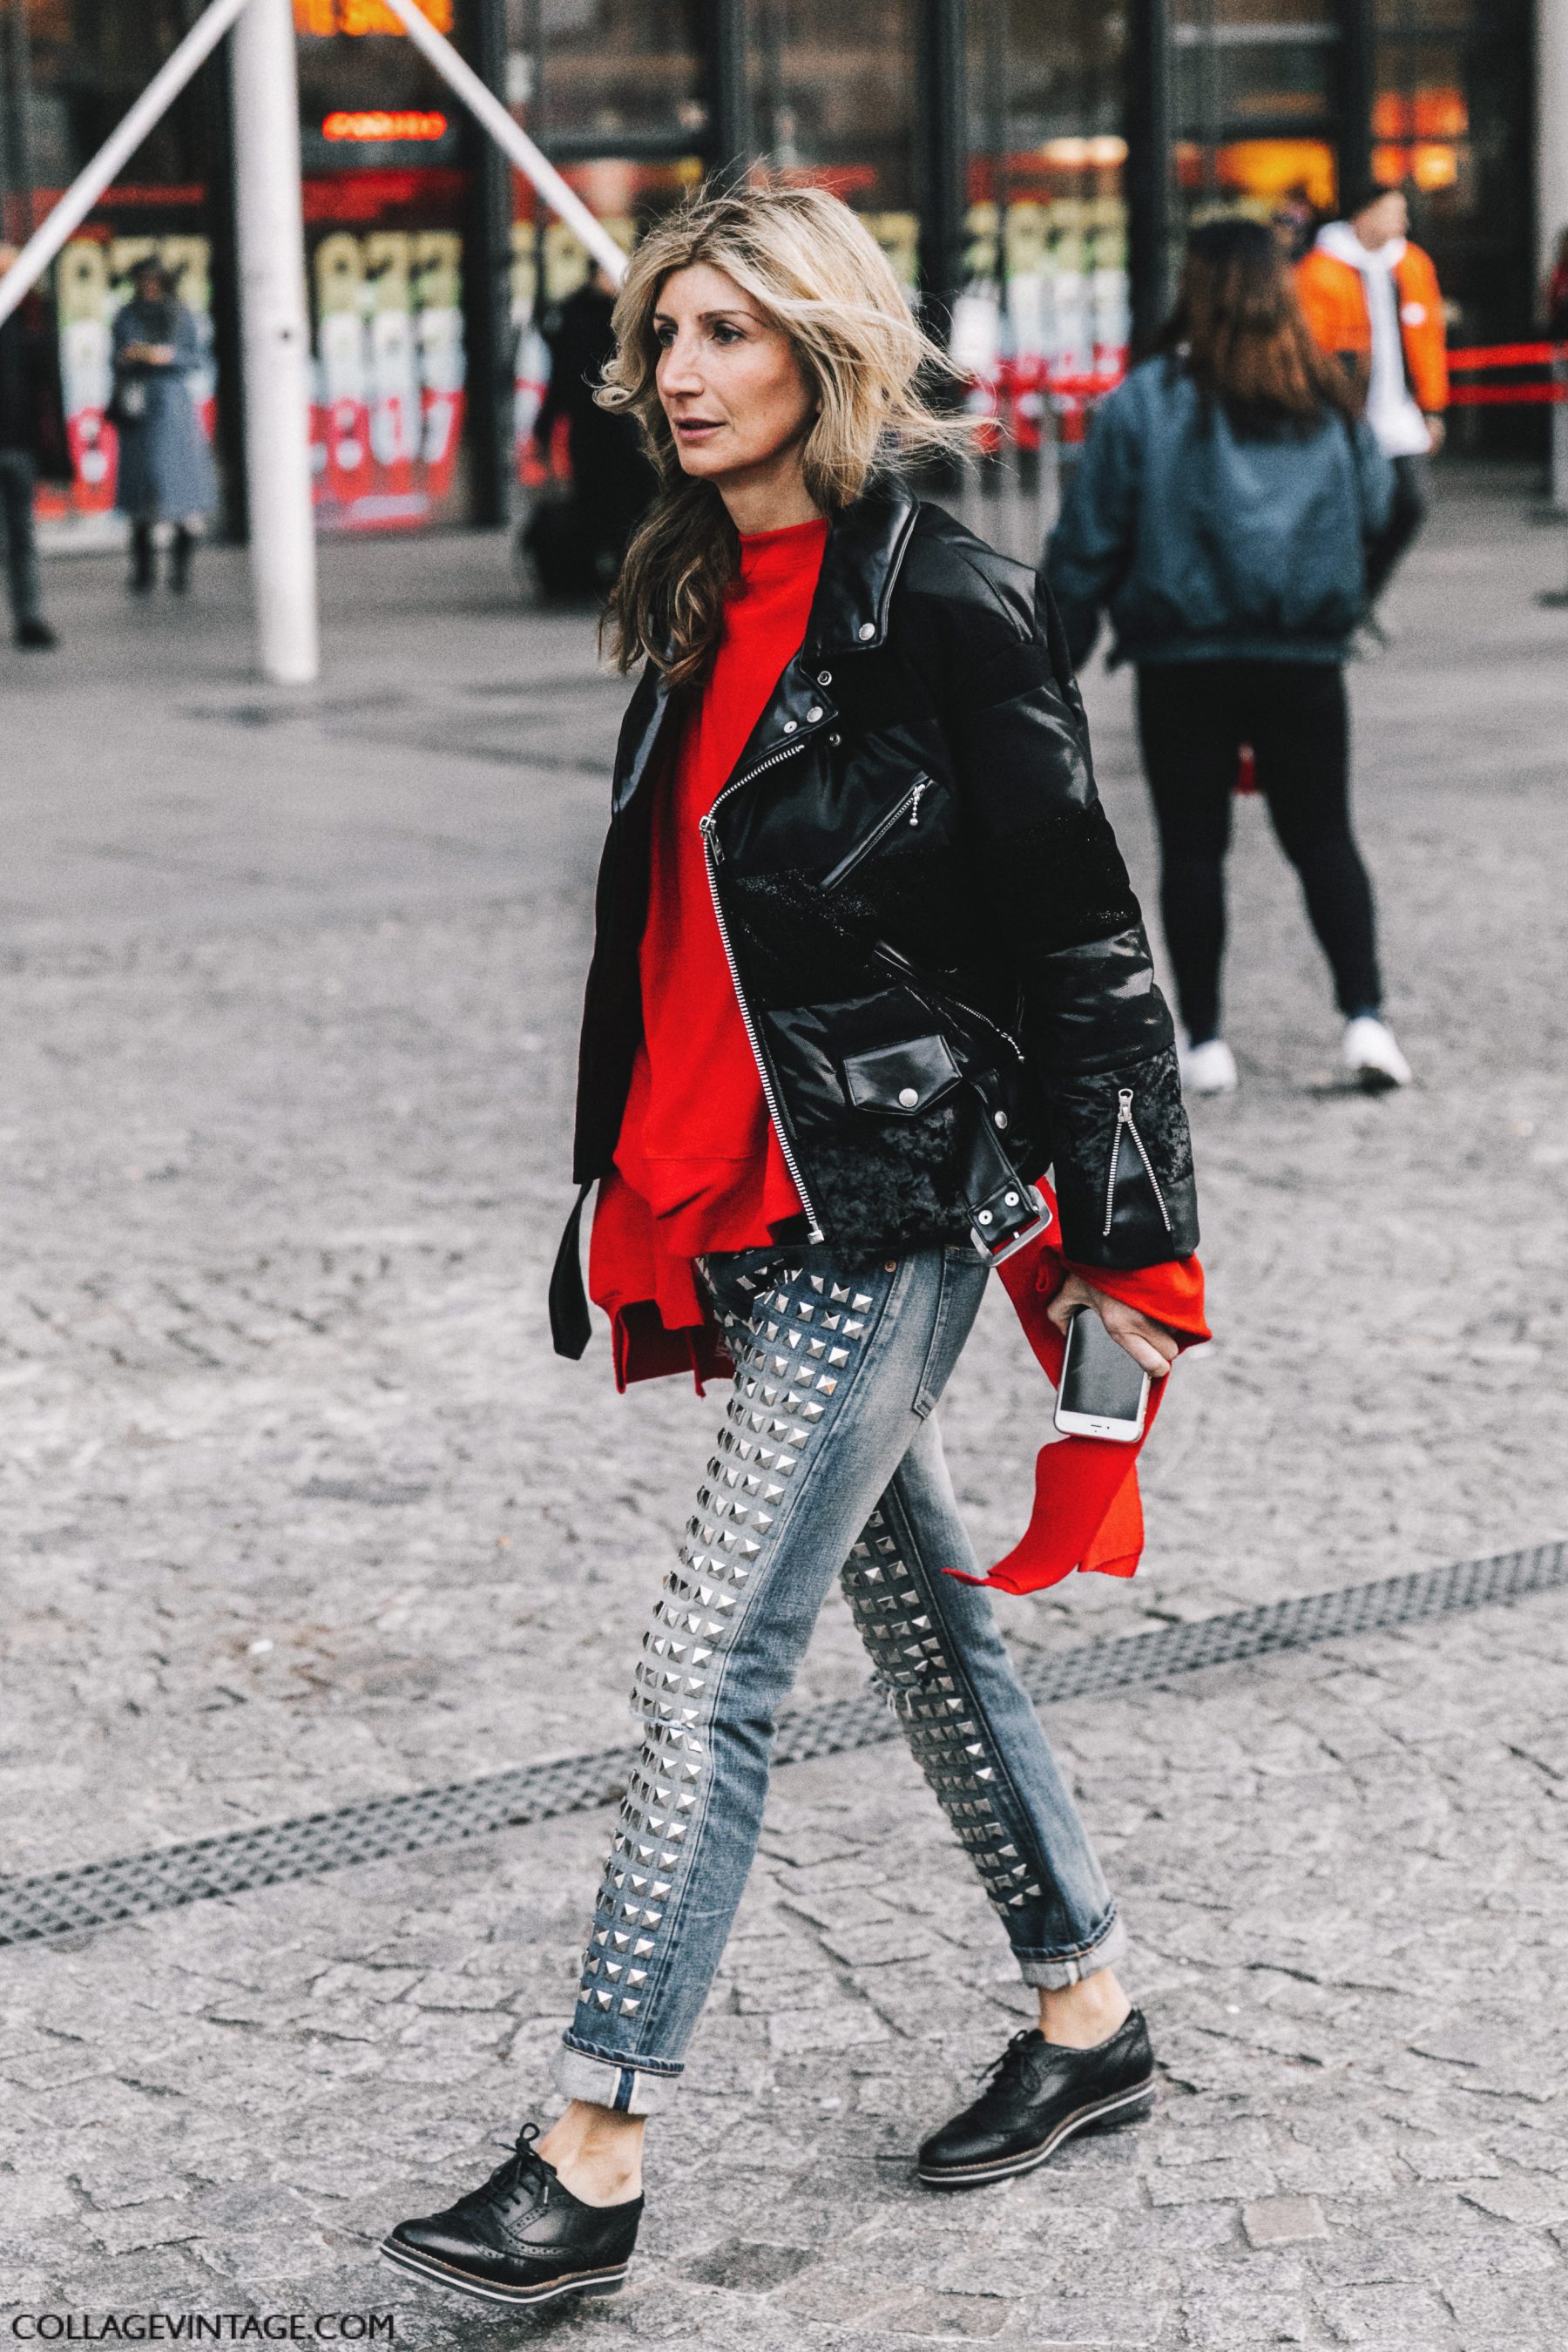 Street style at New York Fashion Week - Leather Celebrities